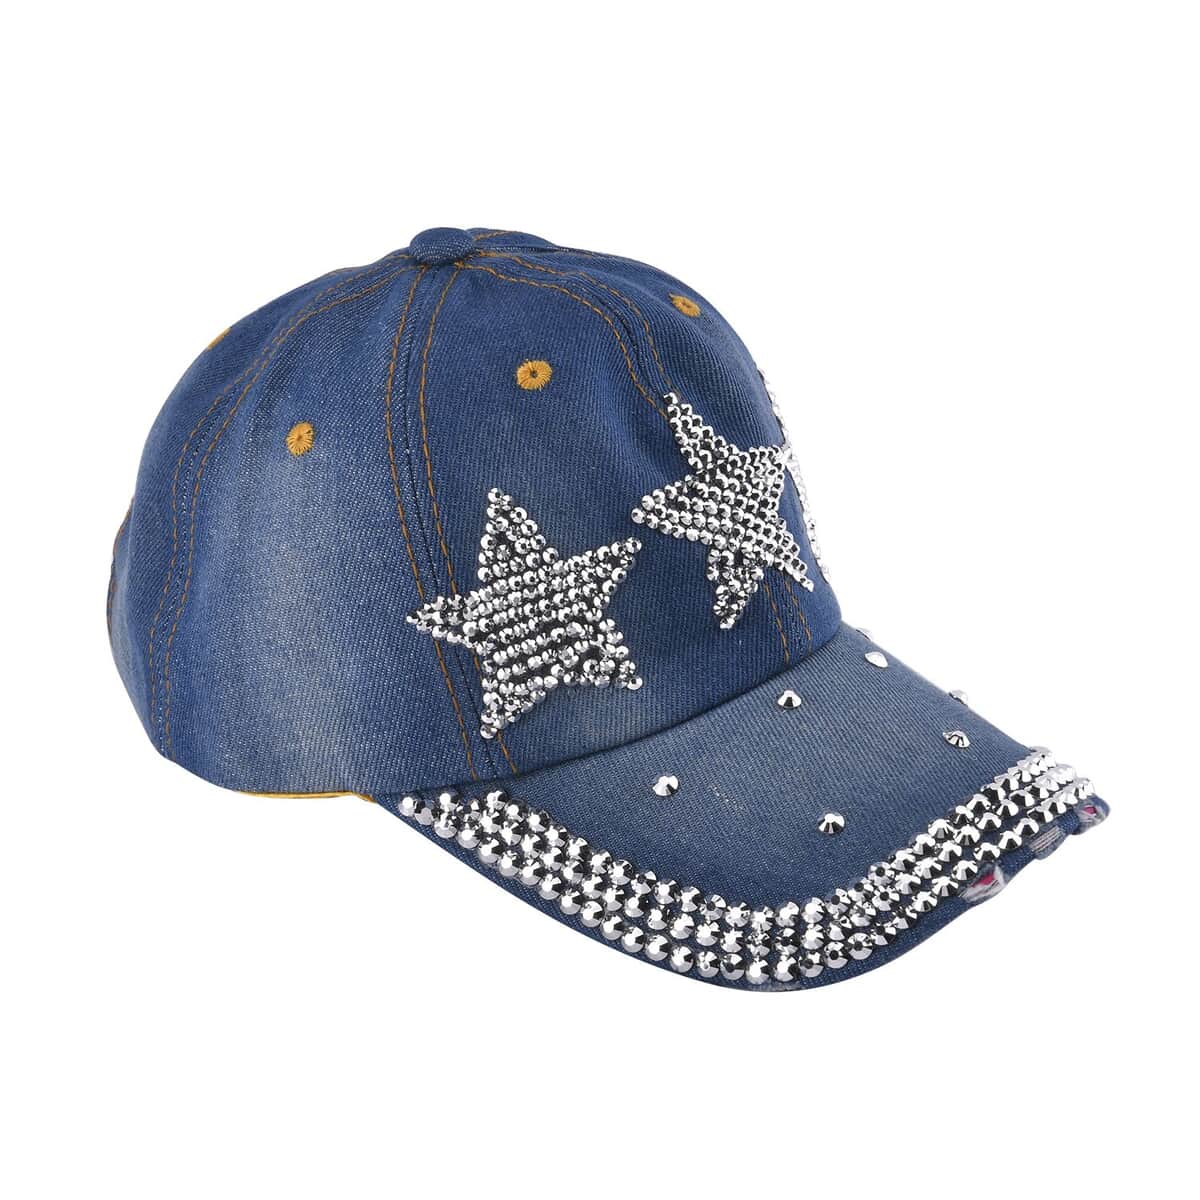 Shining Crystal and Star Cap with Velcro Fasteners (Adjustable Strap) - Blue image number 1